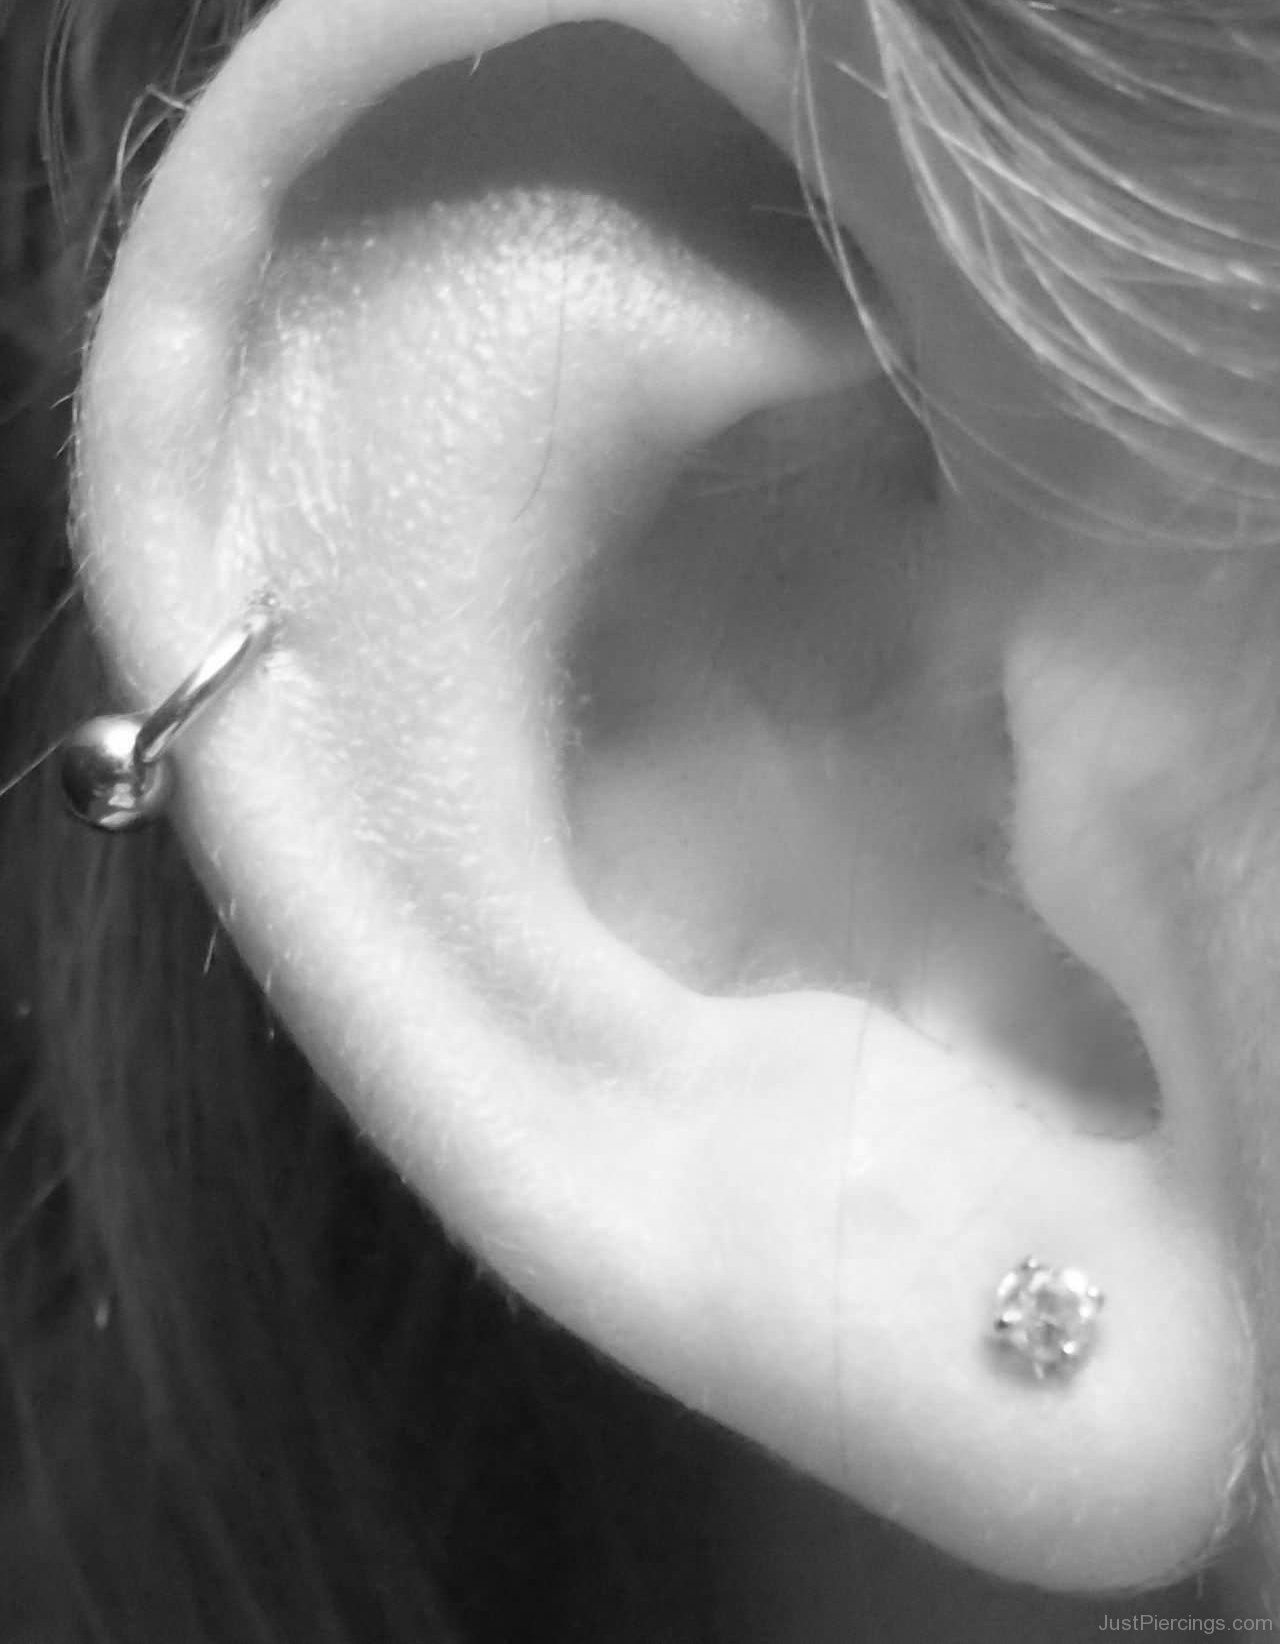 Right Ear Lobe And Rim Piercing With Silver Bead Ring